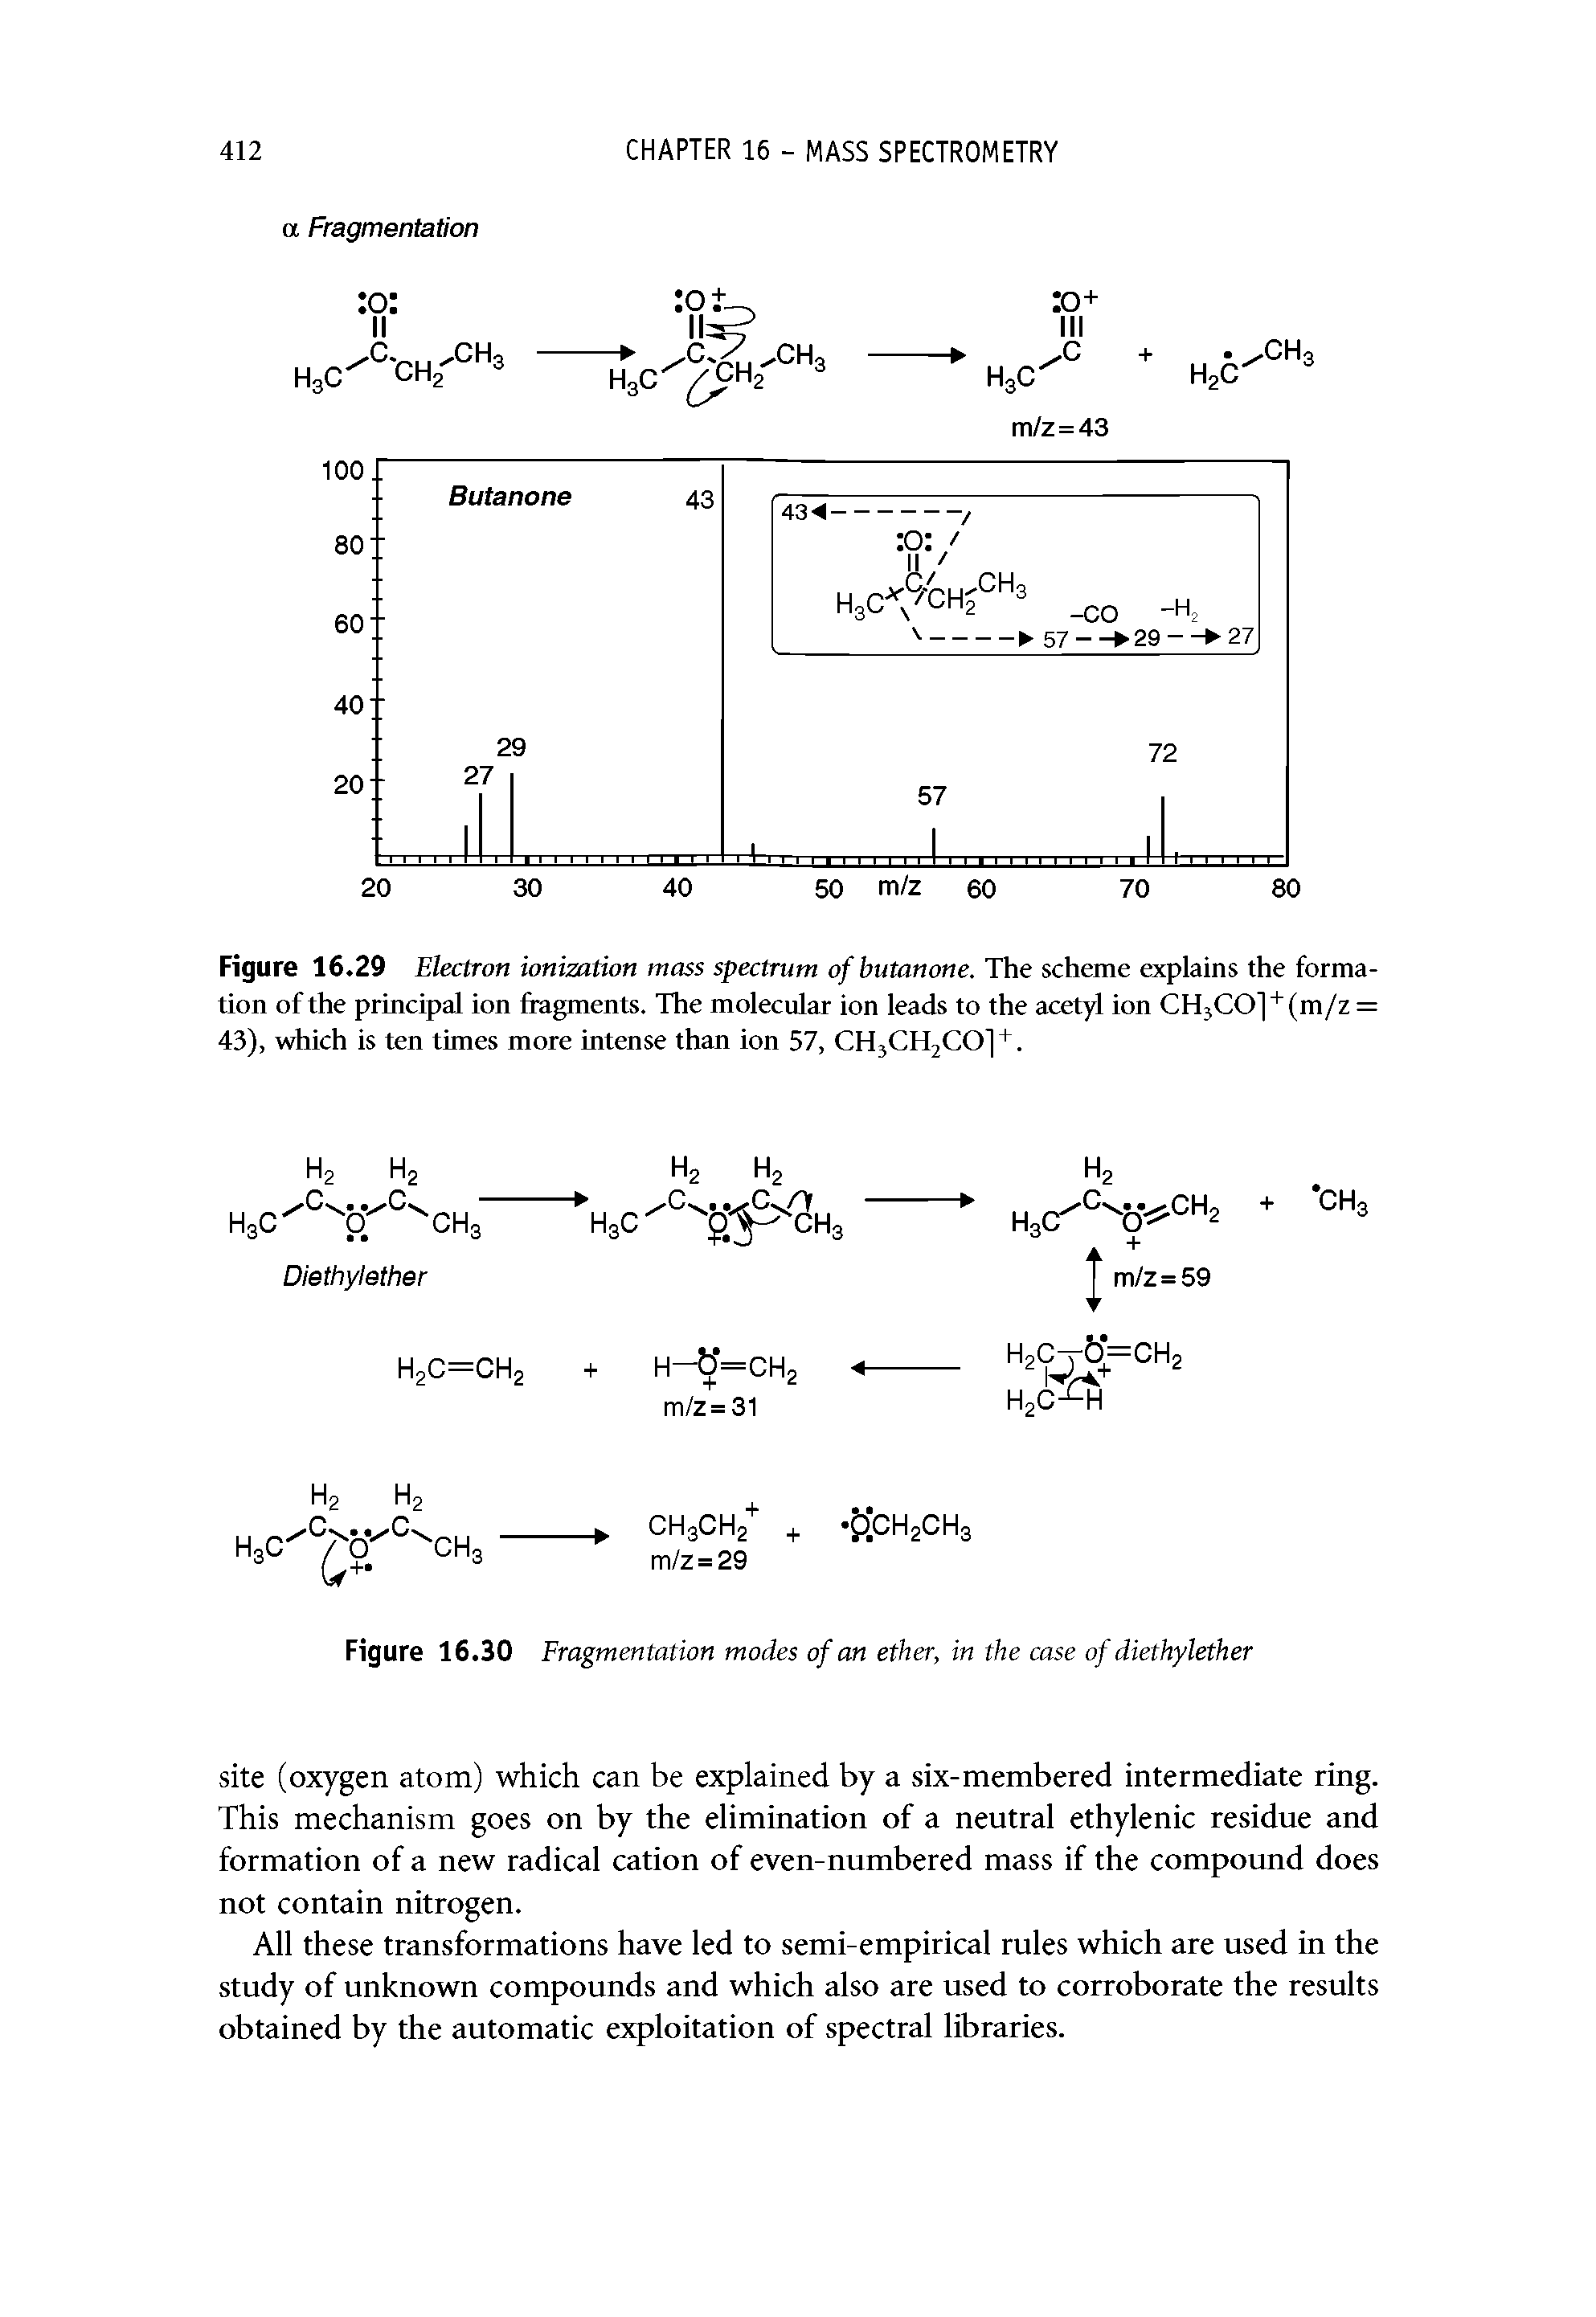 Figure 16.29 Electron ionization mass spectrum of butanone. The scheme explains the formation of the principal ion fragments. The molecular ion leads to the acetyl ion CH3CO] (m/z = 43), which is ten times more intense than ion 57, CH3CH2CO] +. ...